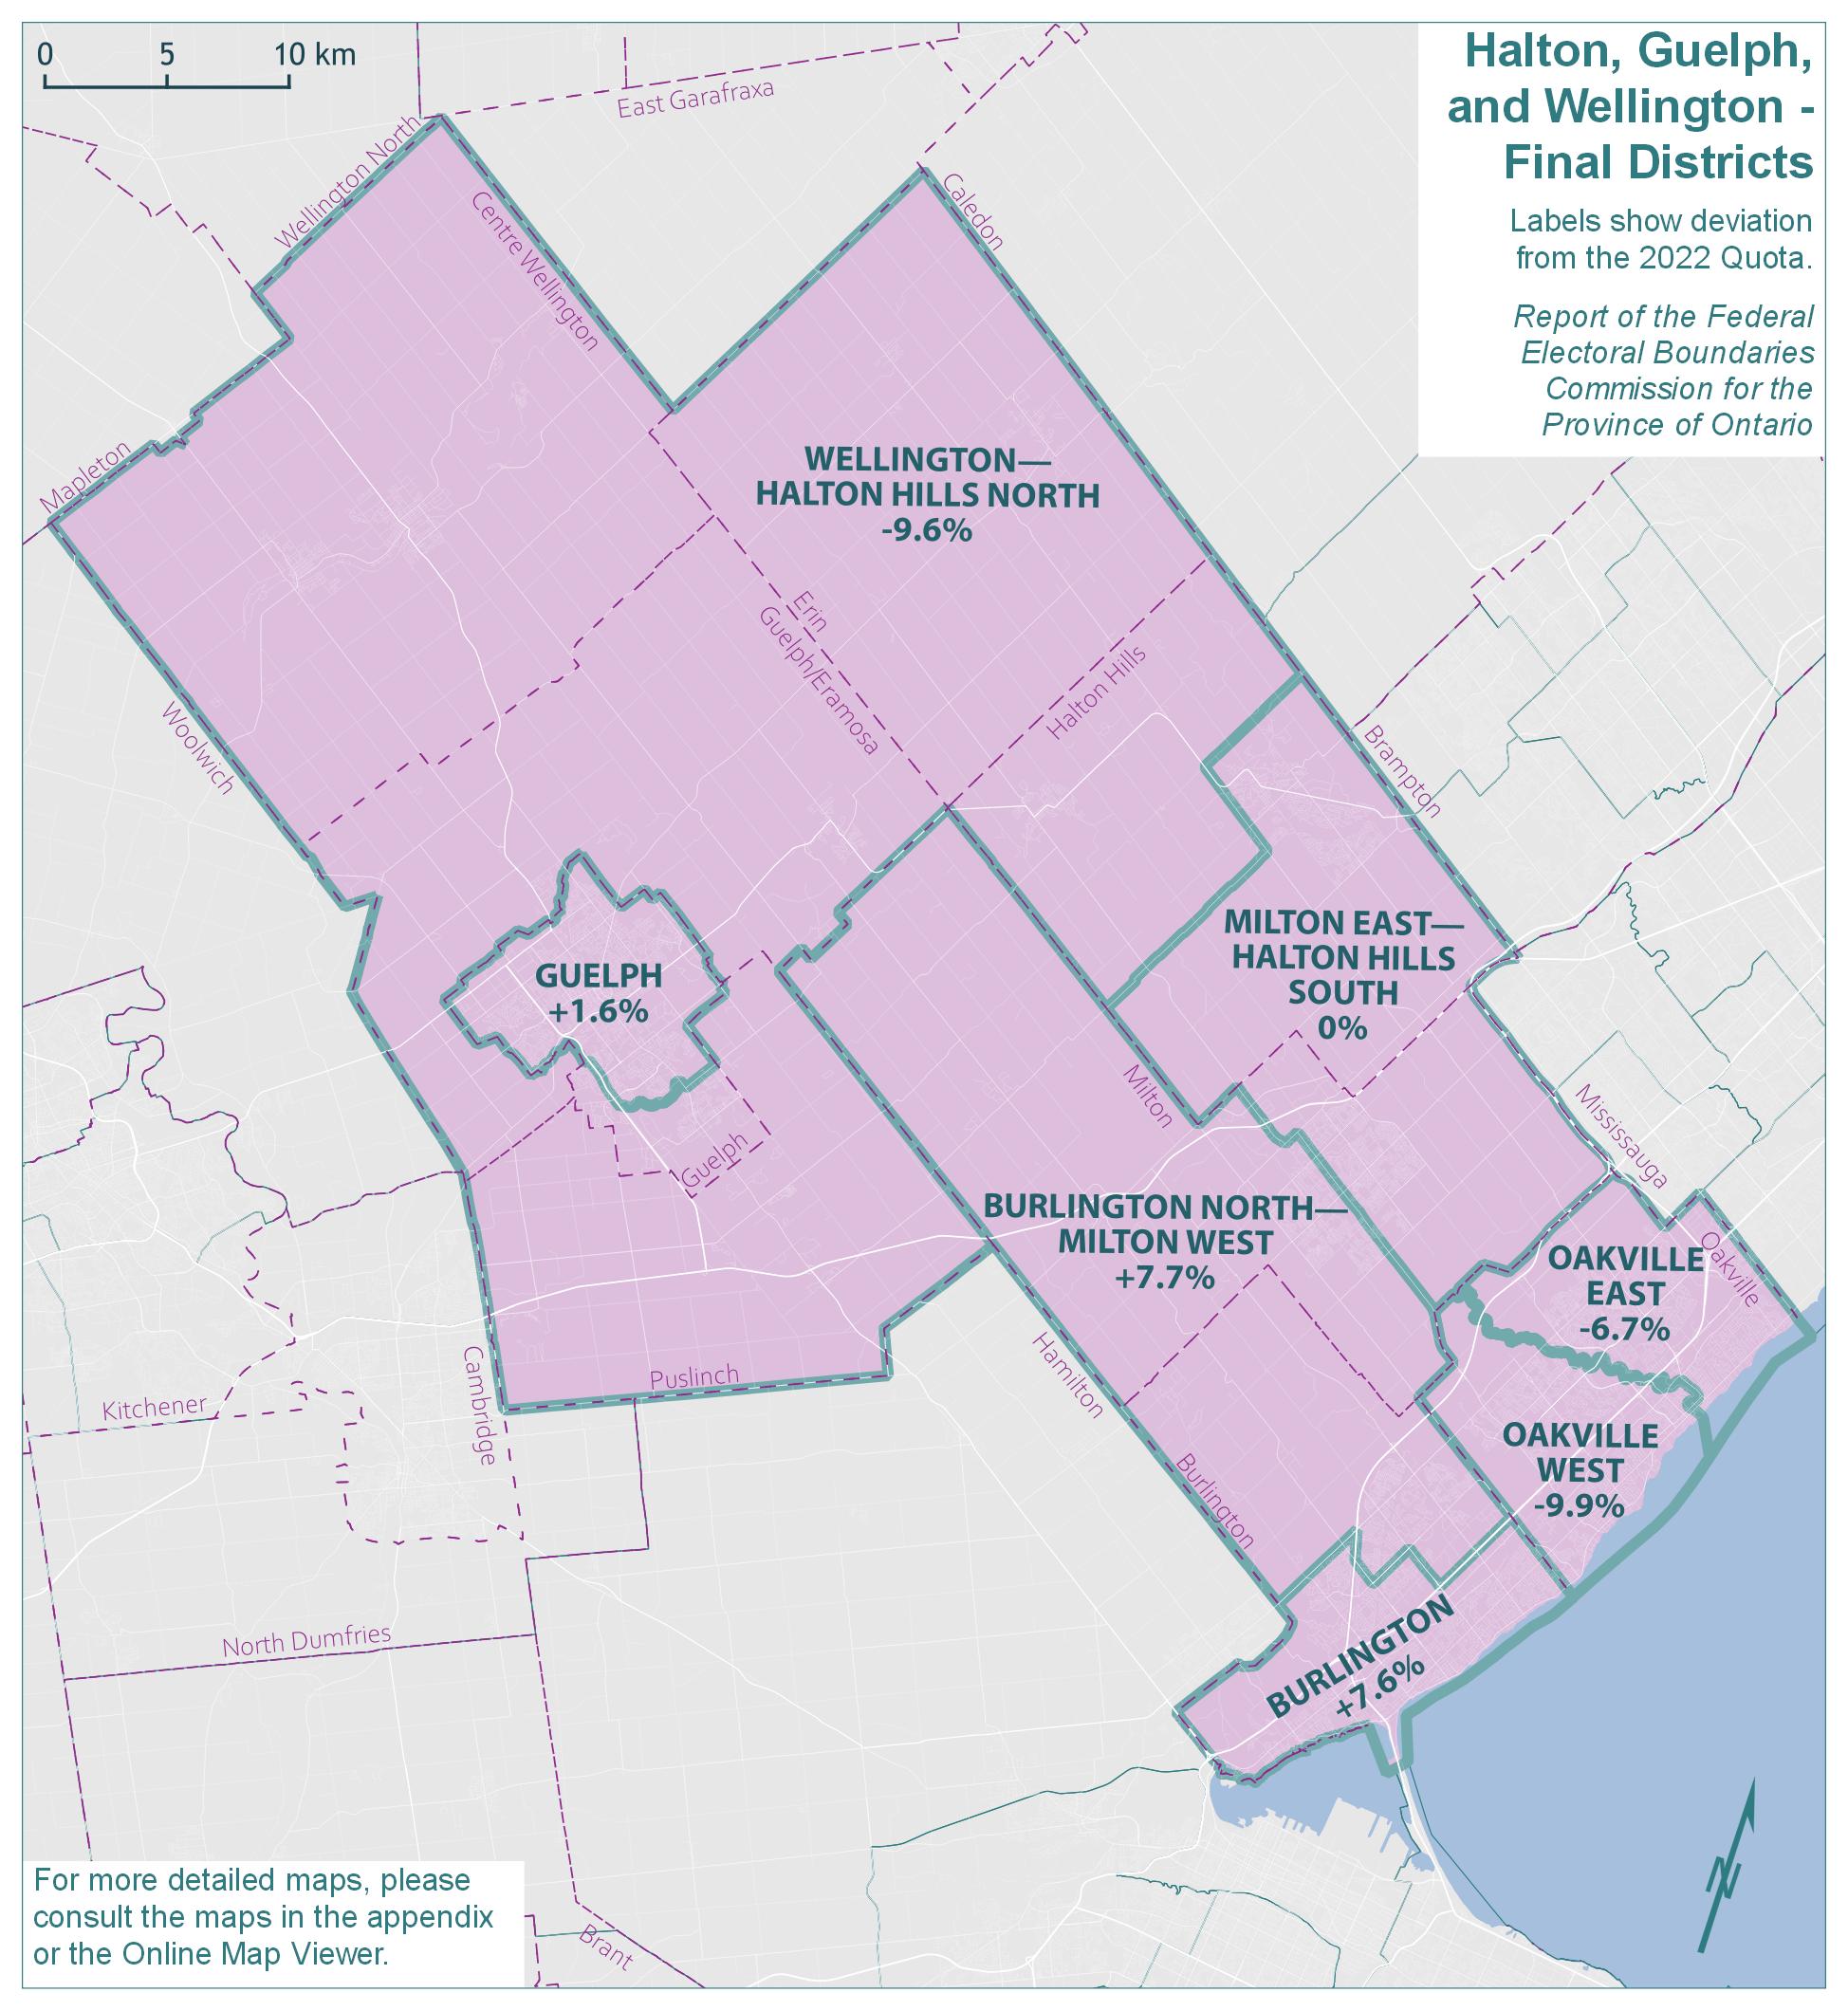 Halton, Guelph, and Wellington - Final Districts